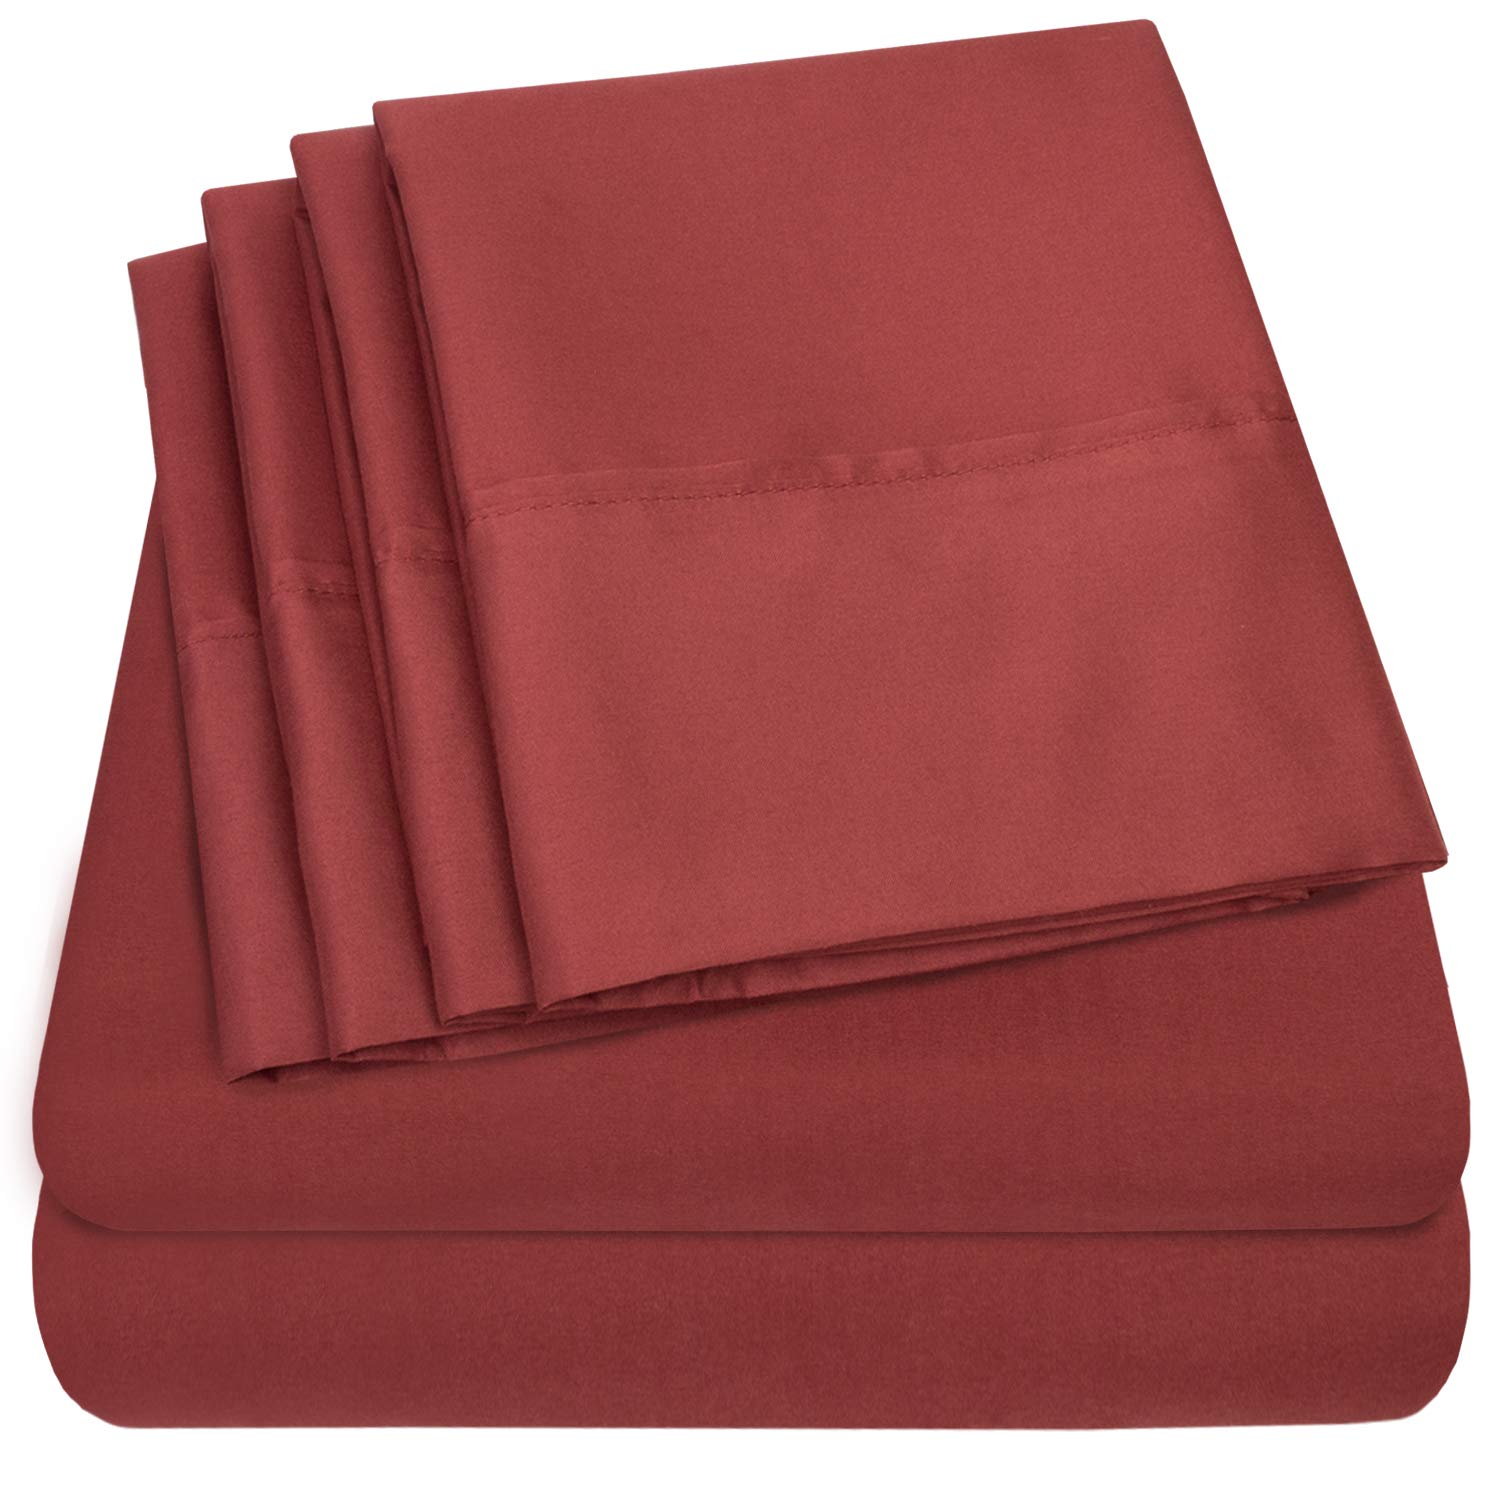 Book Cover Twin Size Bed Sheets - 4 Piece 1500 Supreme Collection Fine Brushed Microfiber Deep Pocket Twin Sheet Set Bedding - 1 EXTRA PILLOW CASES, GREAT VALUE, Twin, Burgundy Burgundy Twin